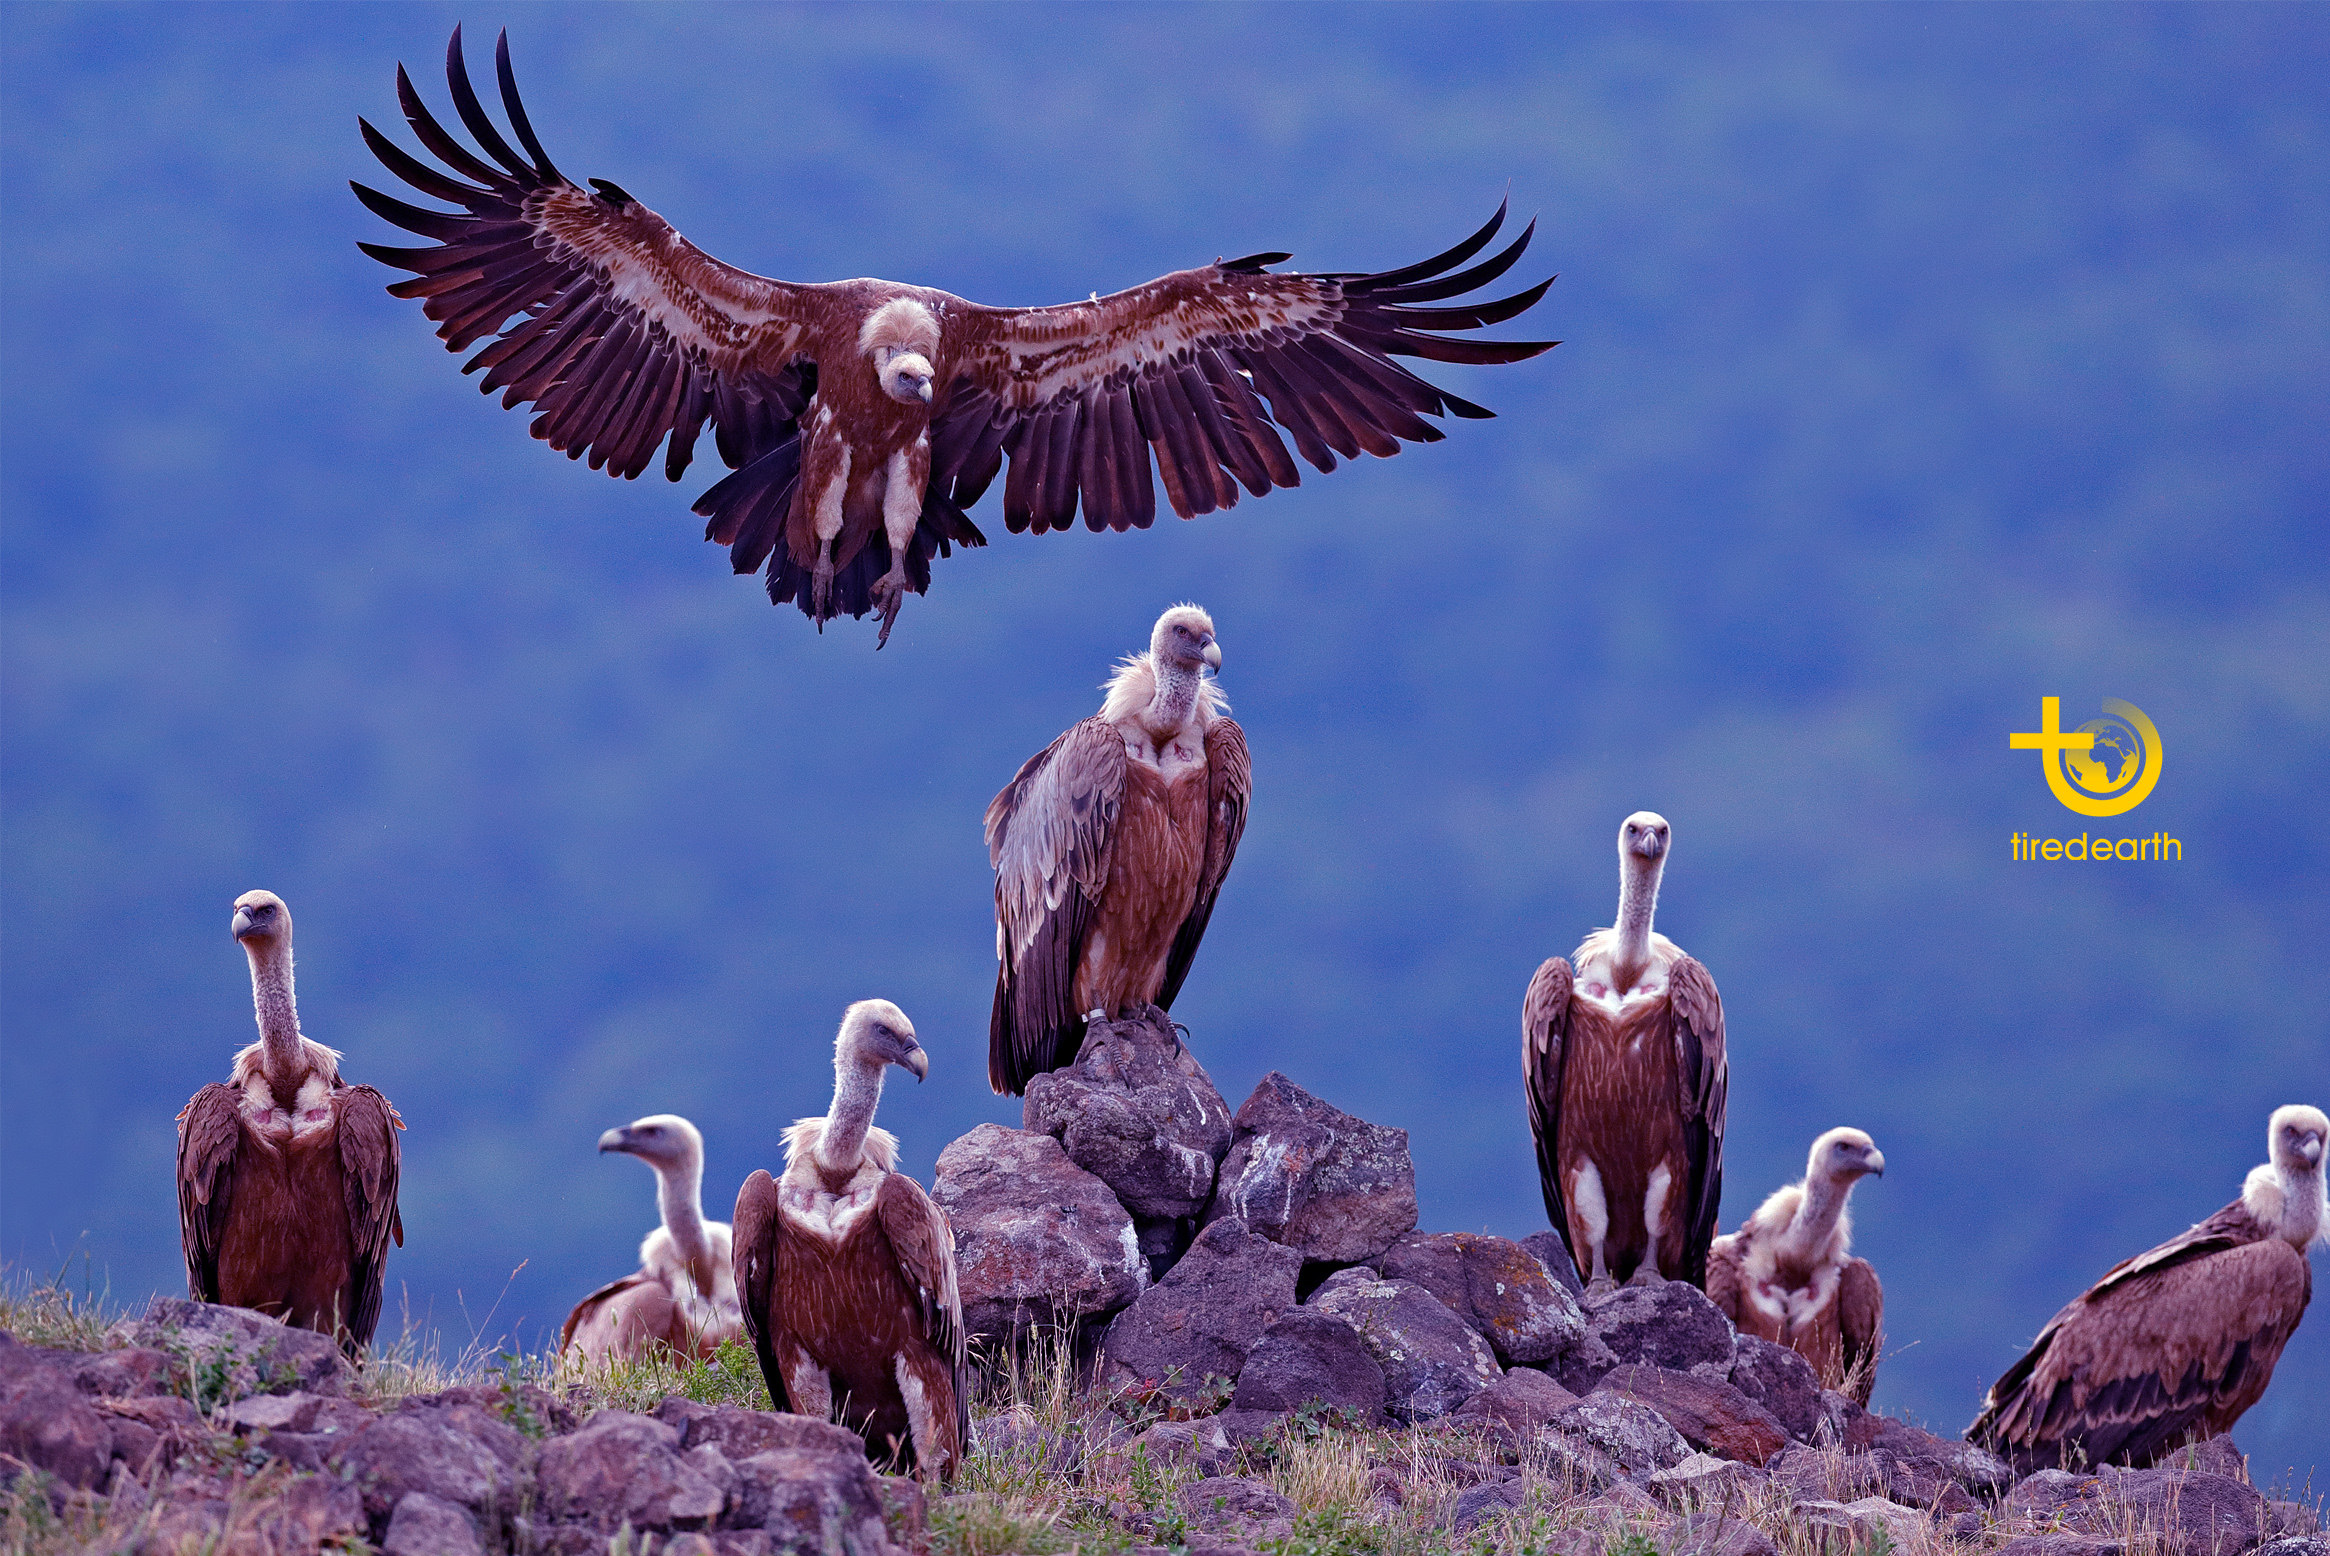 protecting-vultures-tiredearth.jpg